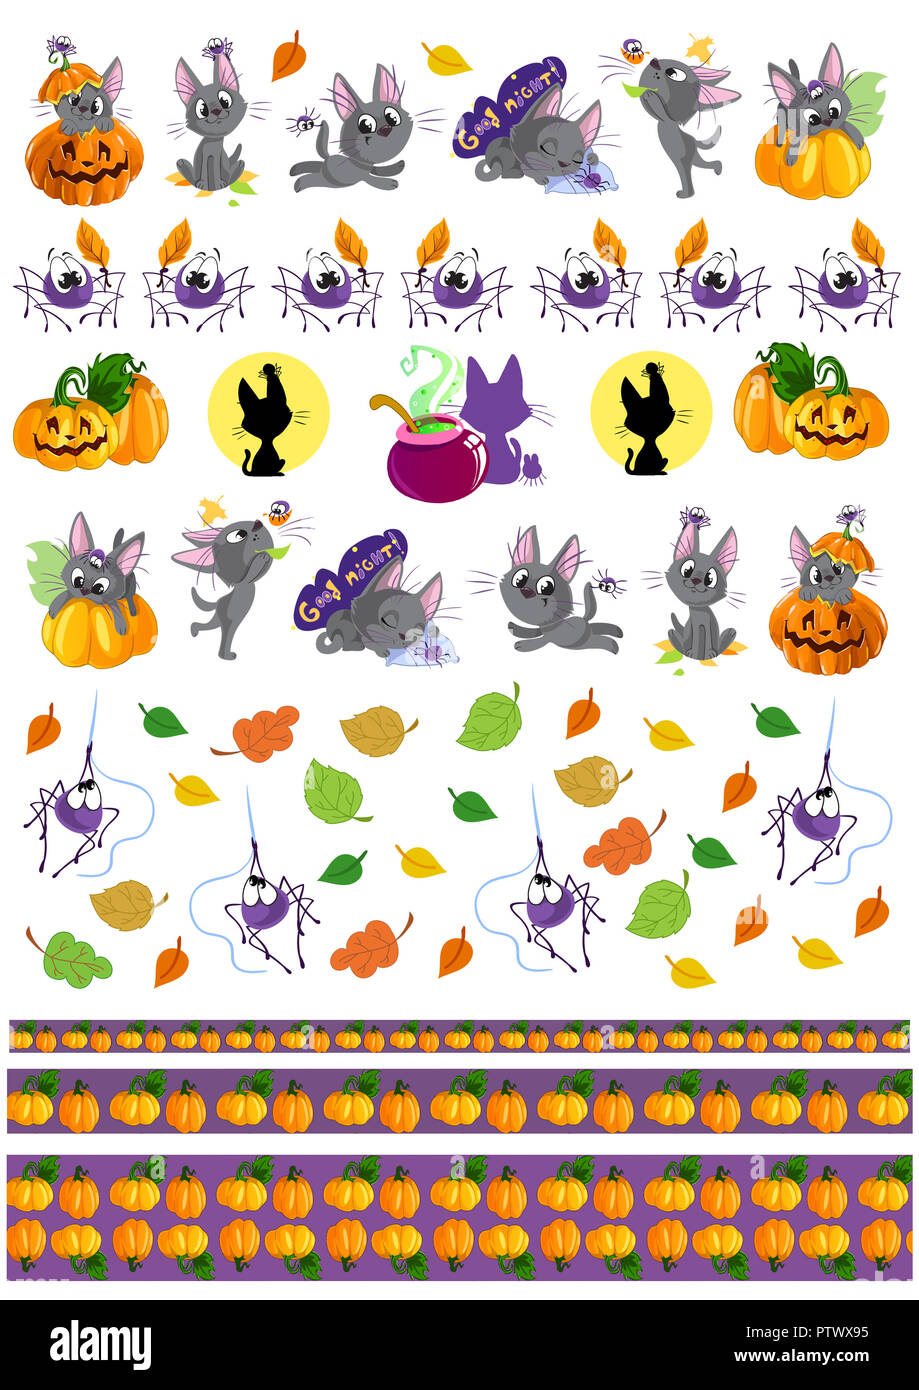 Weekly planner stickers for Halloween days. Cute cartoon black cat kitten in different poses and pumpkins Stock Photo